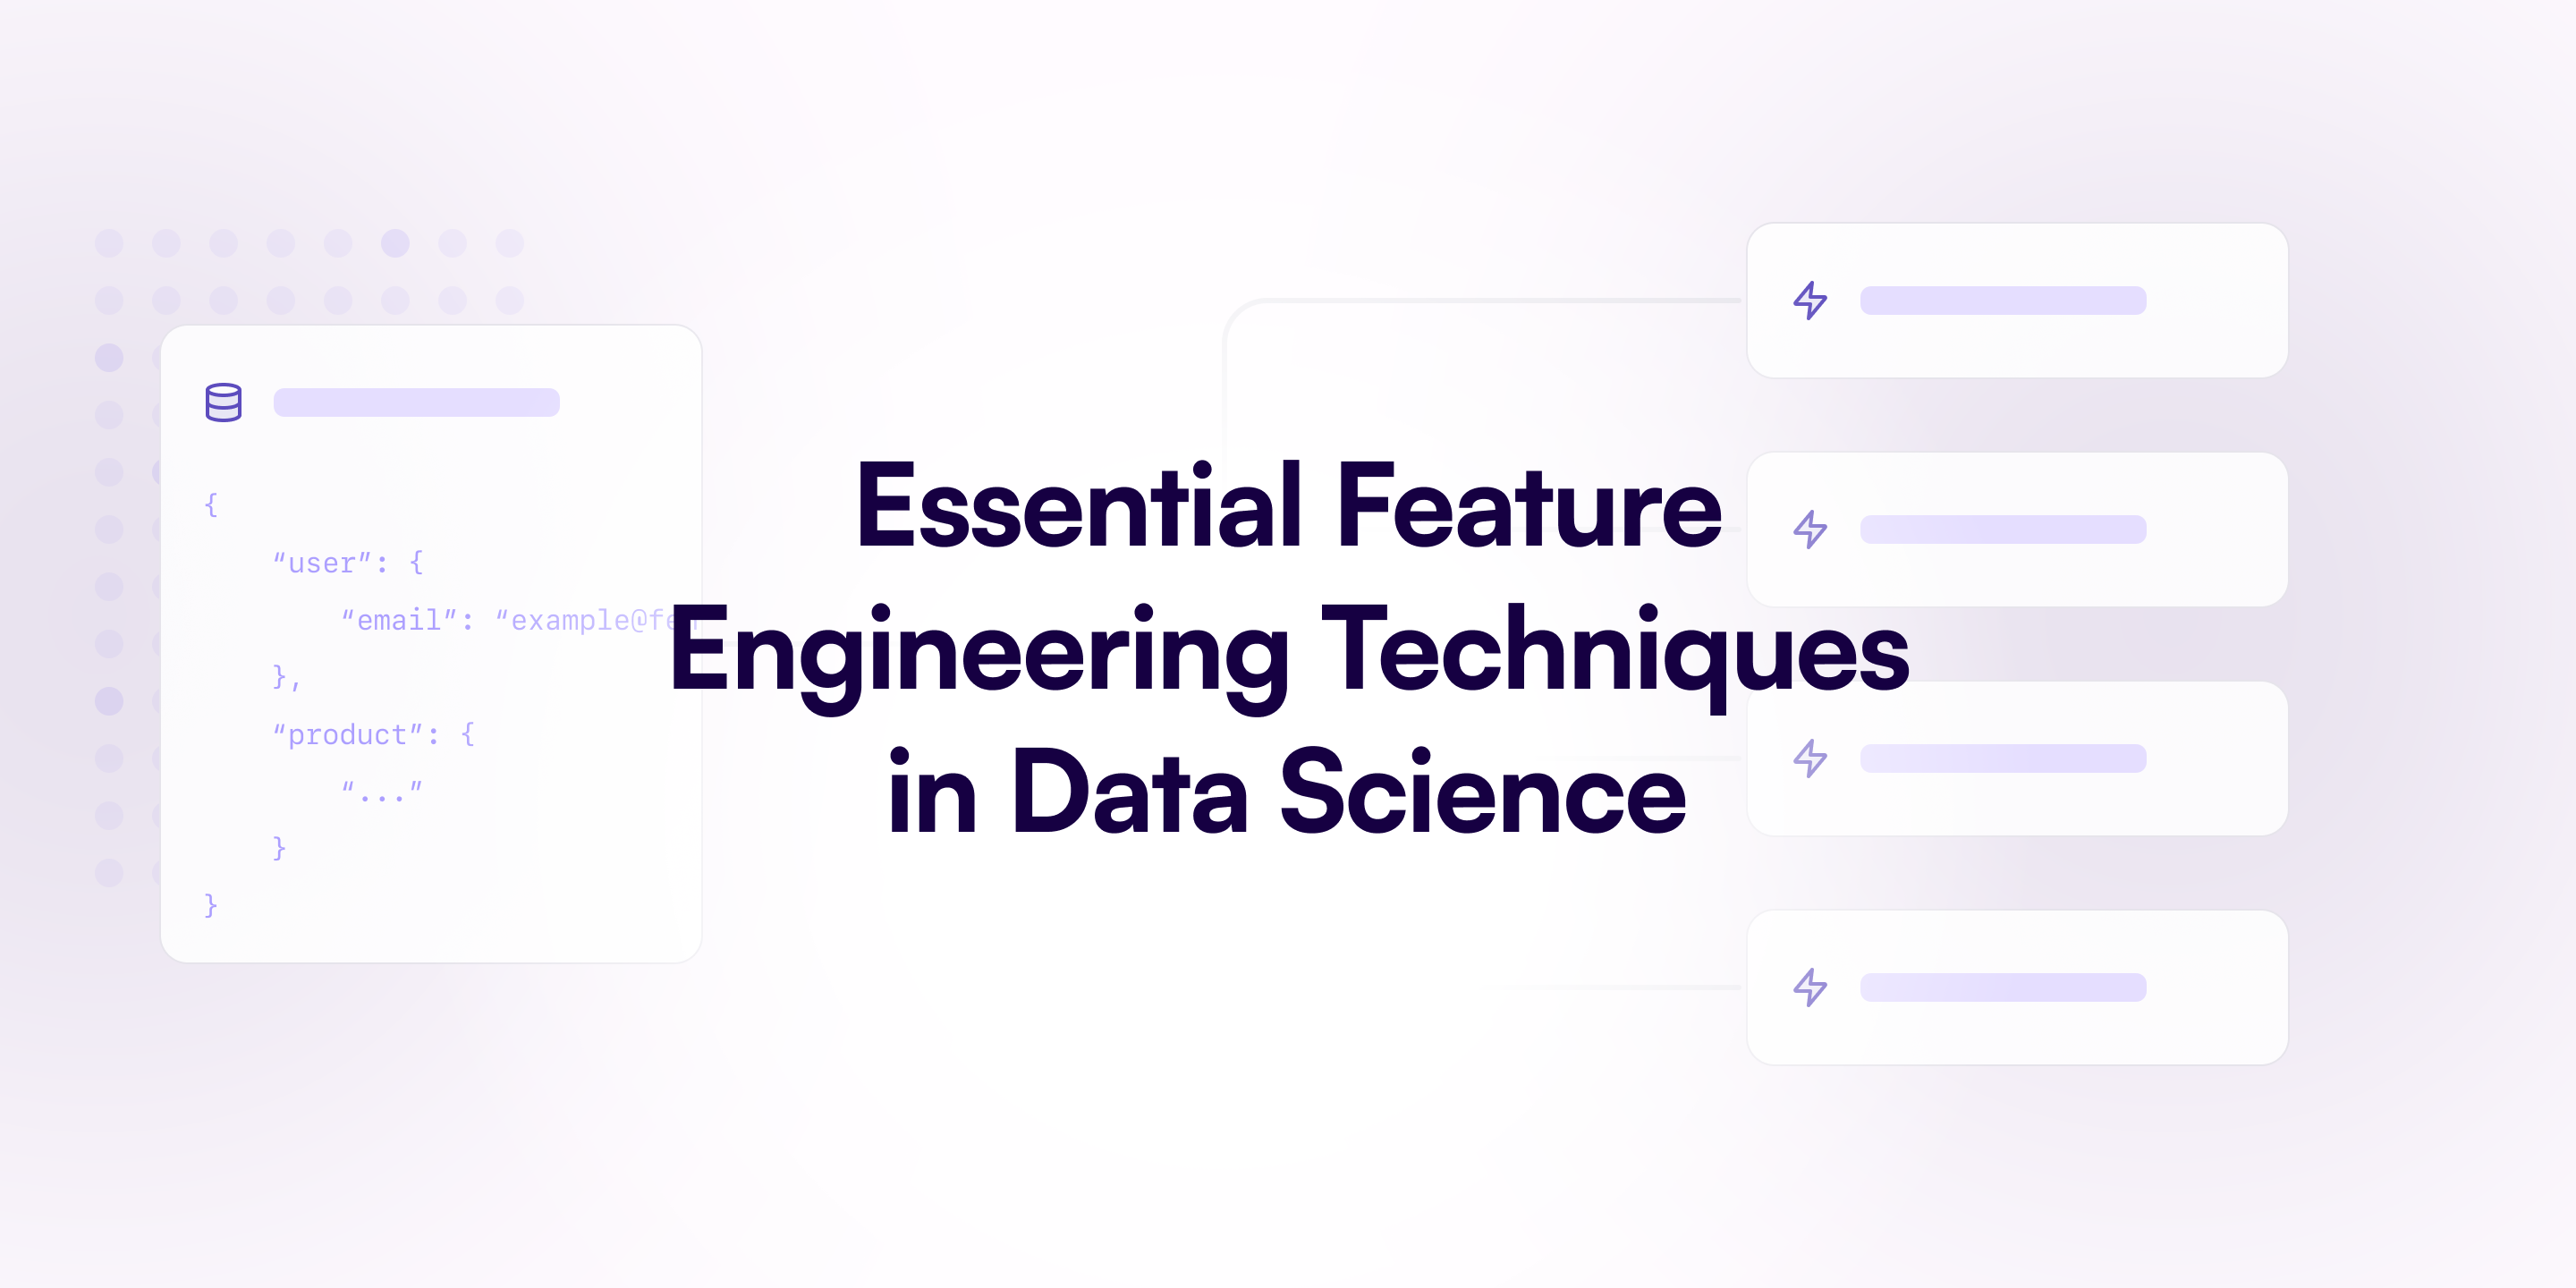 Essential Feature Engineering Techniques in Data Science